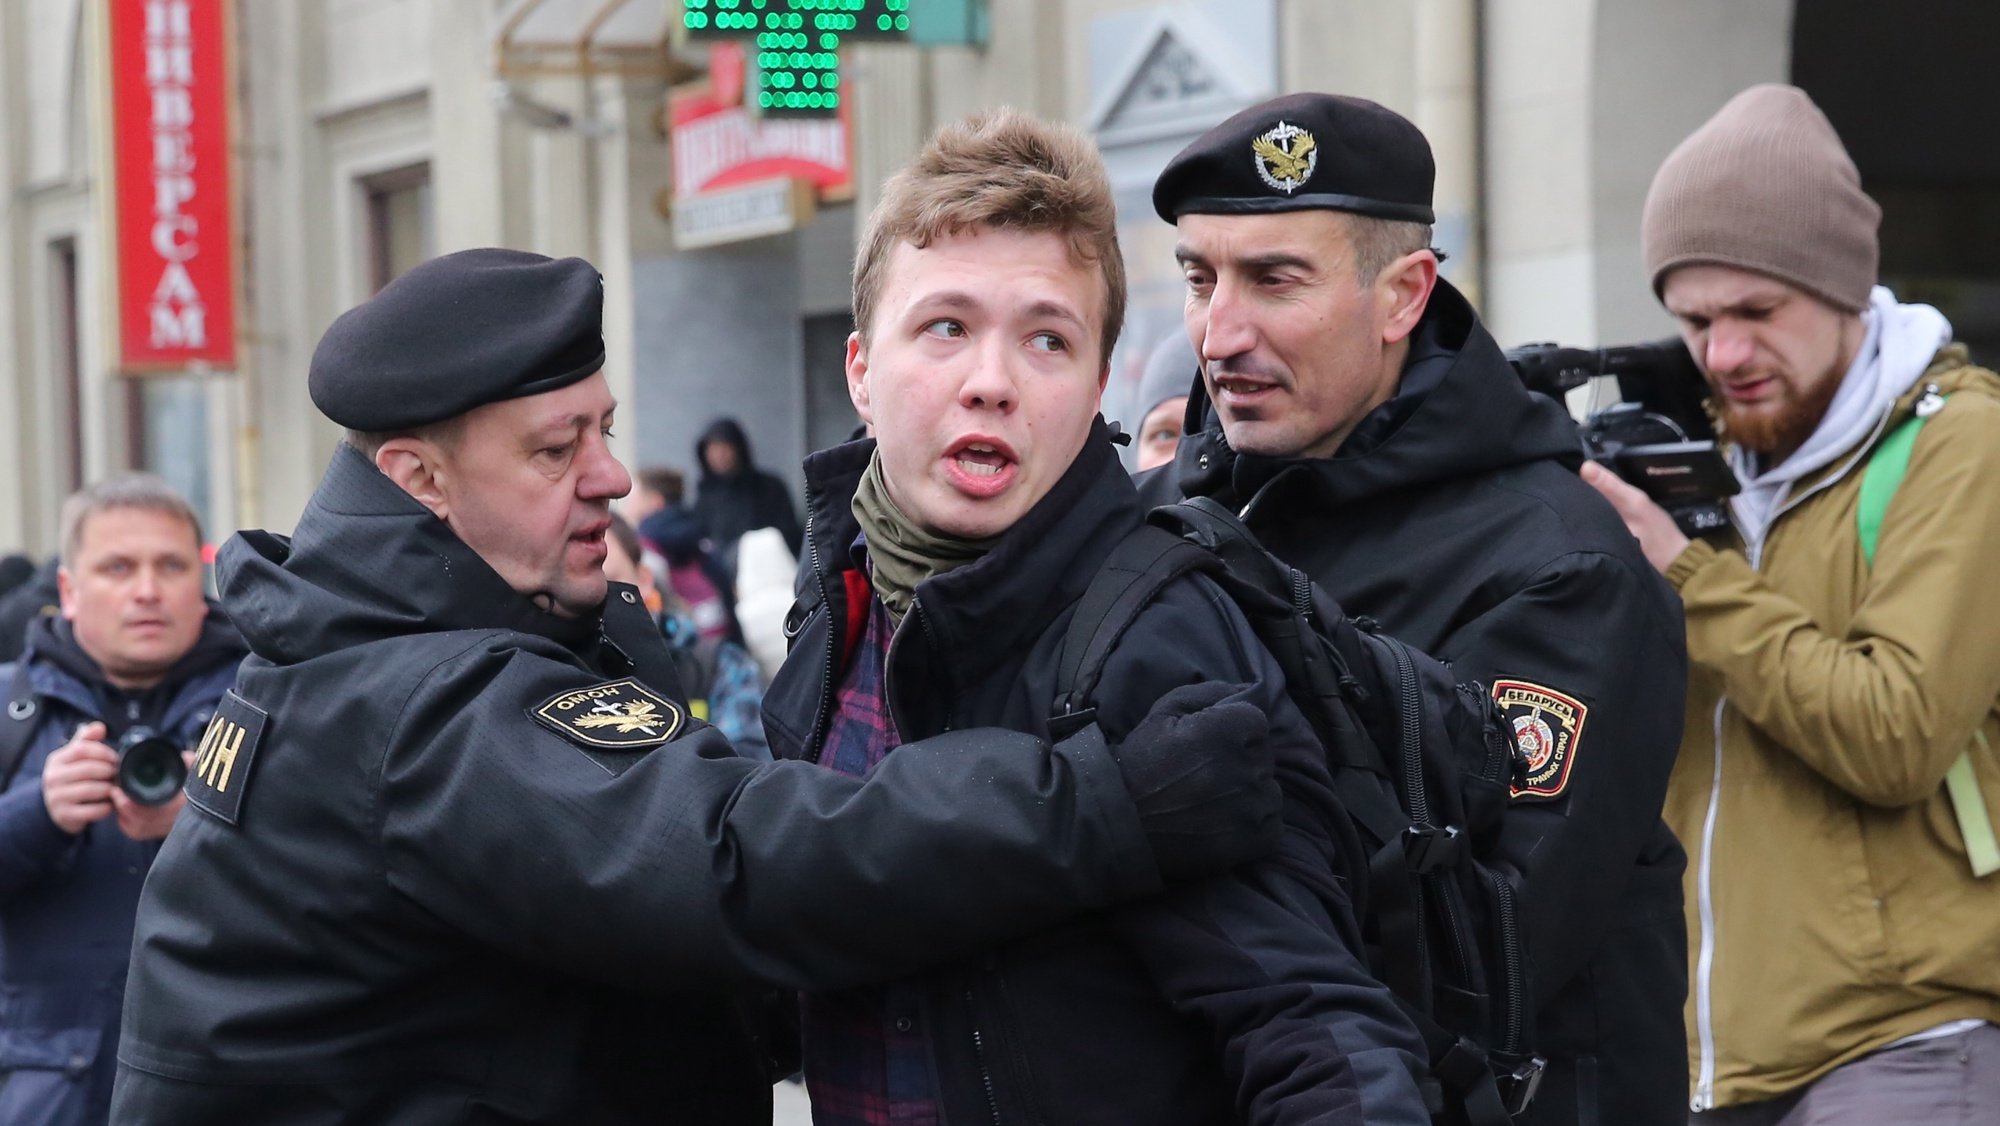 epa09223072 (FILE) Police officers detain a journalist Roman Protasevich attempting to cover a rally in Minsk, Belarus, 26 March 2017 (reissued 23 May 2021). A Ryanair flight from Athens, Greece to Vilnius, Lithuania, with Belarus&#039; opposition journalist Roman Protasevich onboard, has been diverted and forced to land in Minsk on 23 May 2021, after alleged bomb threat. Protasevich was detained by Belarusian Police after landing, as Belarusian Human Rights Center &#039;Viasna&#039; reports and Lithuanian President Gitanas Nauseda demanded immediate release of Protasevich.  EPA/STRINGER *** Local Caption *** 53411871